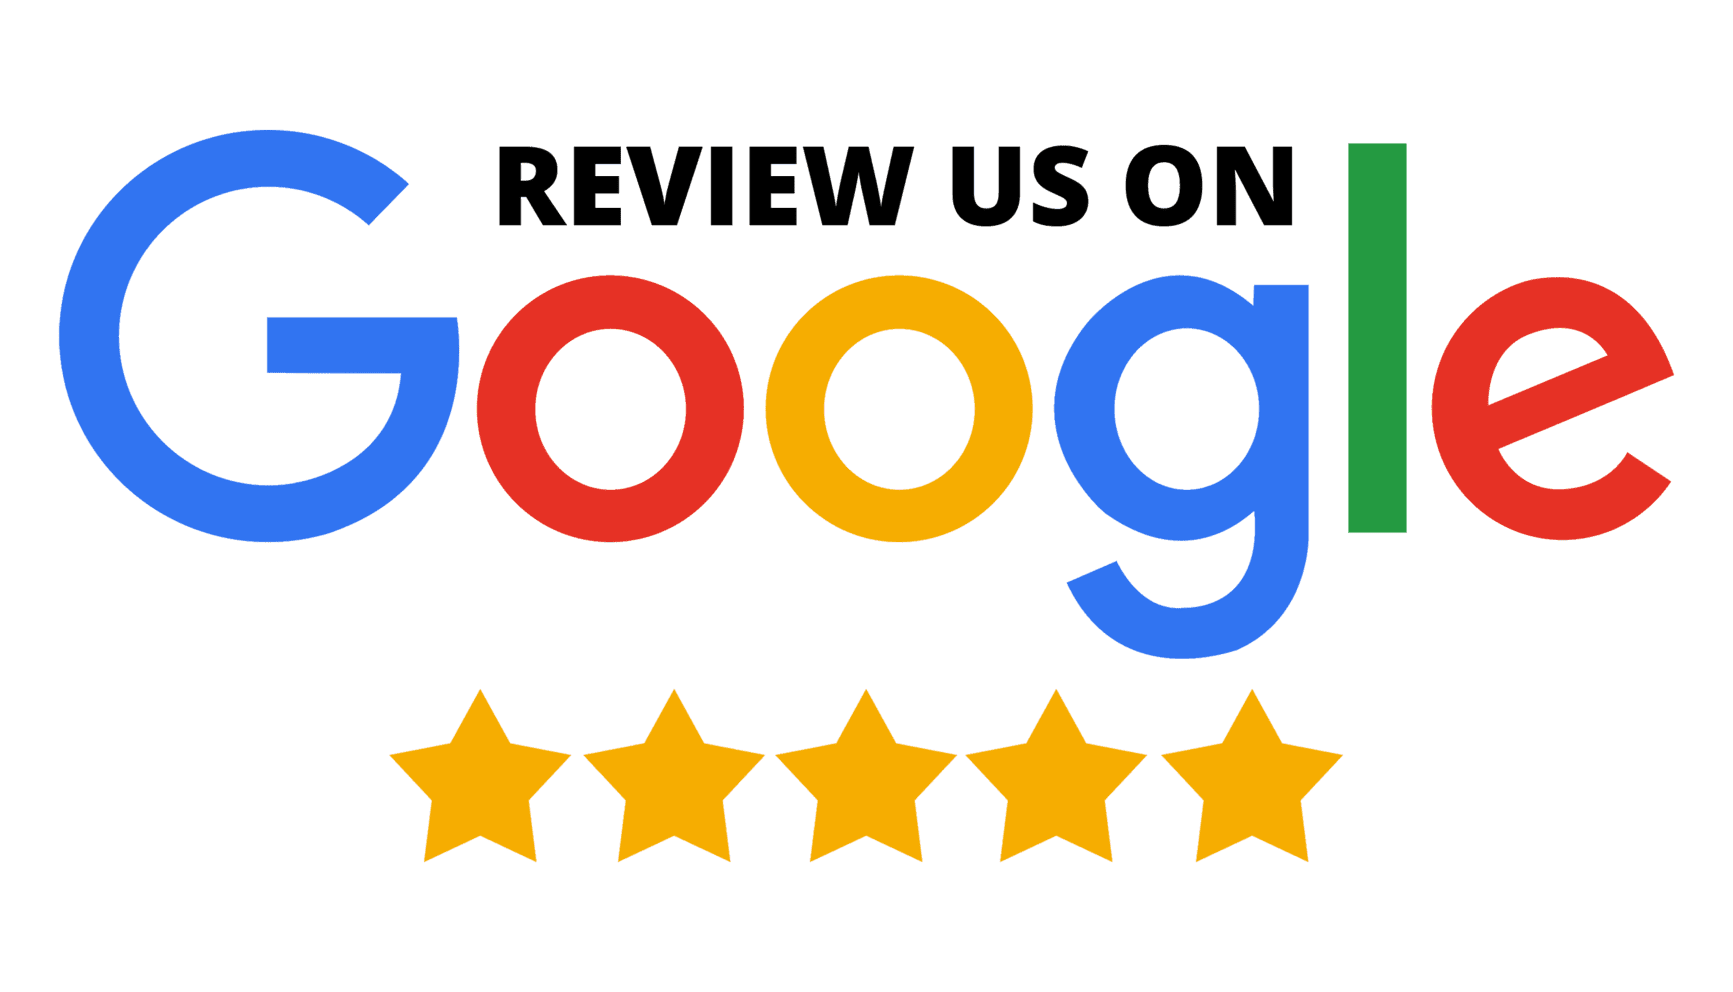 Post a Google Review for JP Global Marketing!